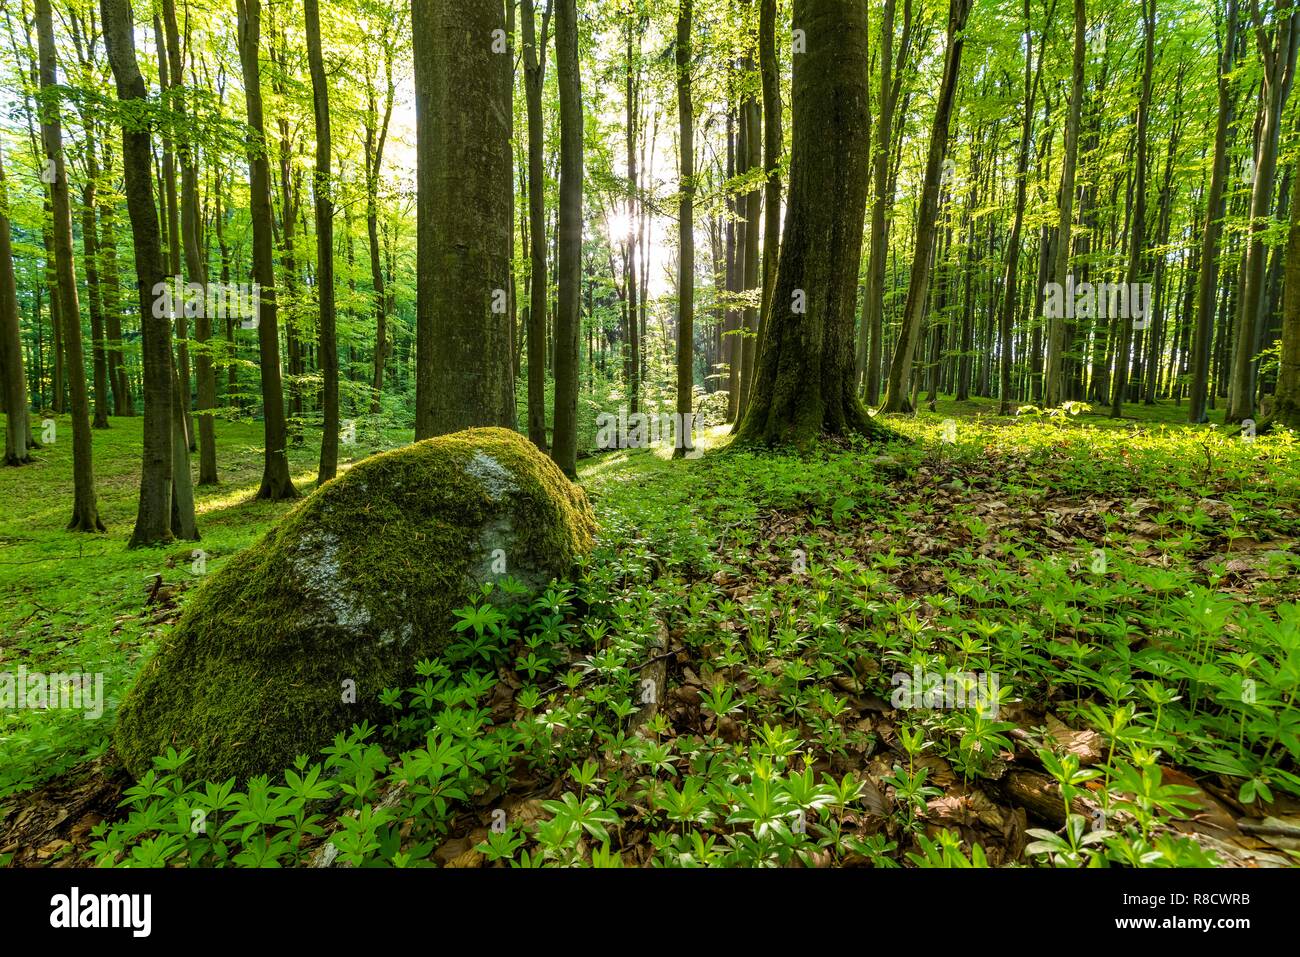 A springy, green beech forest that comes to life, with leaves penetrating the rays of the morning sun. Poland, Beech Reserve, Warmia. Stock Photo